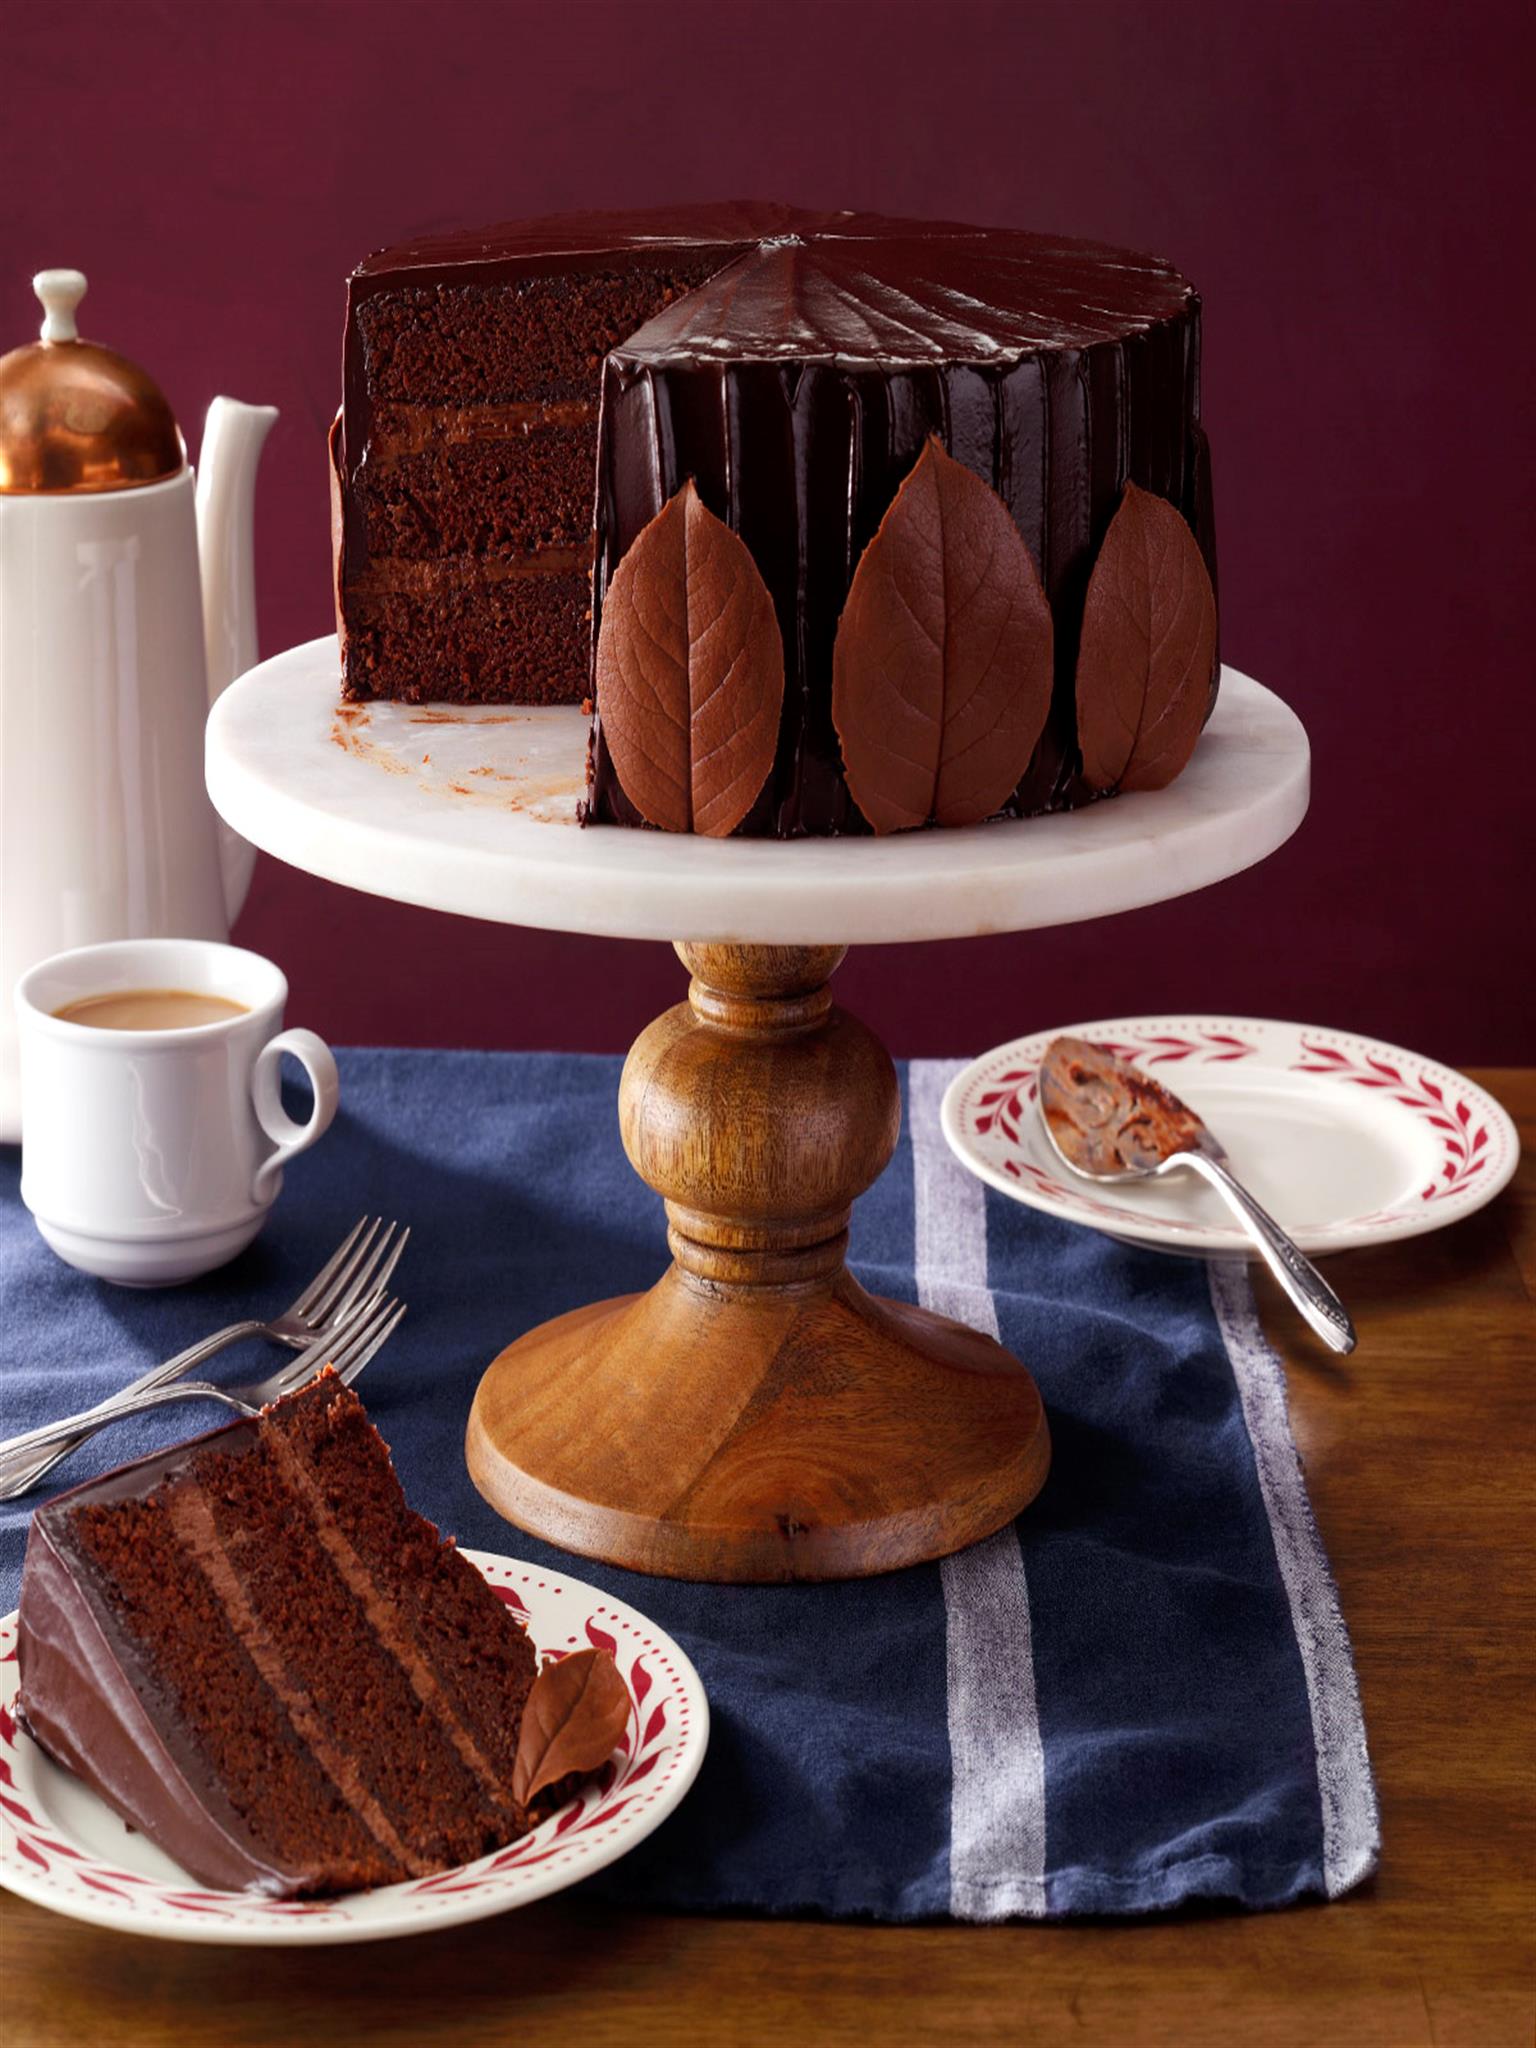 The Best Chocolate Cake Recipe by Tasty